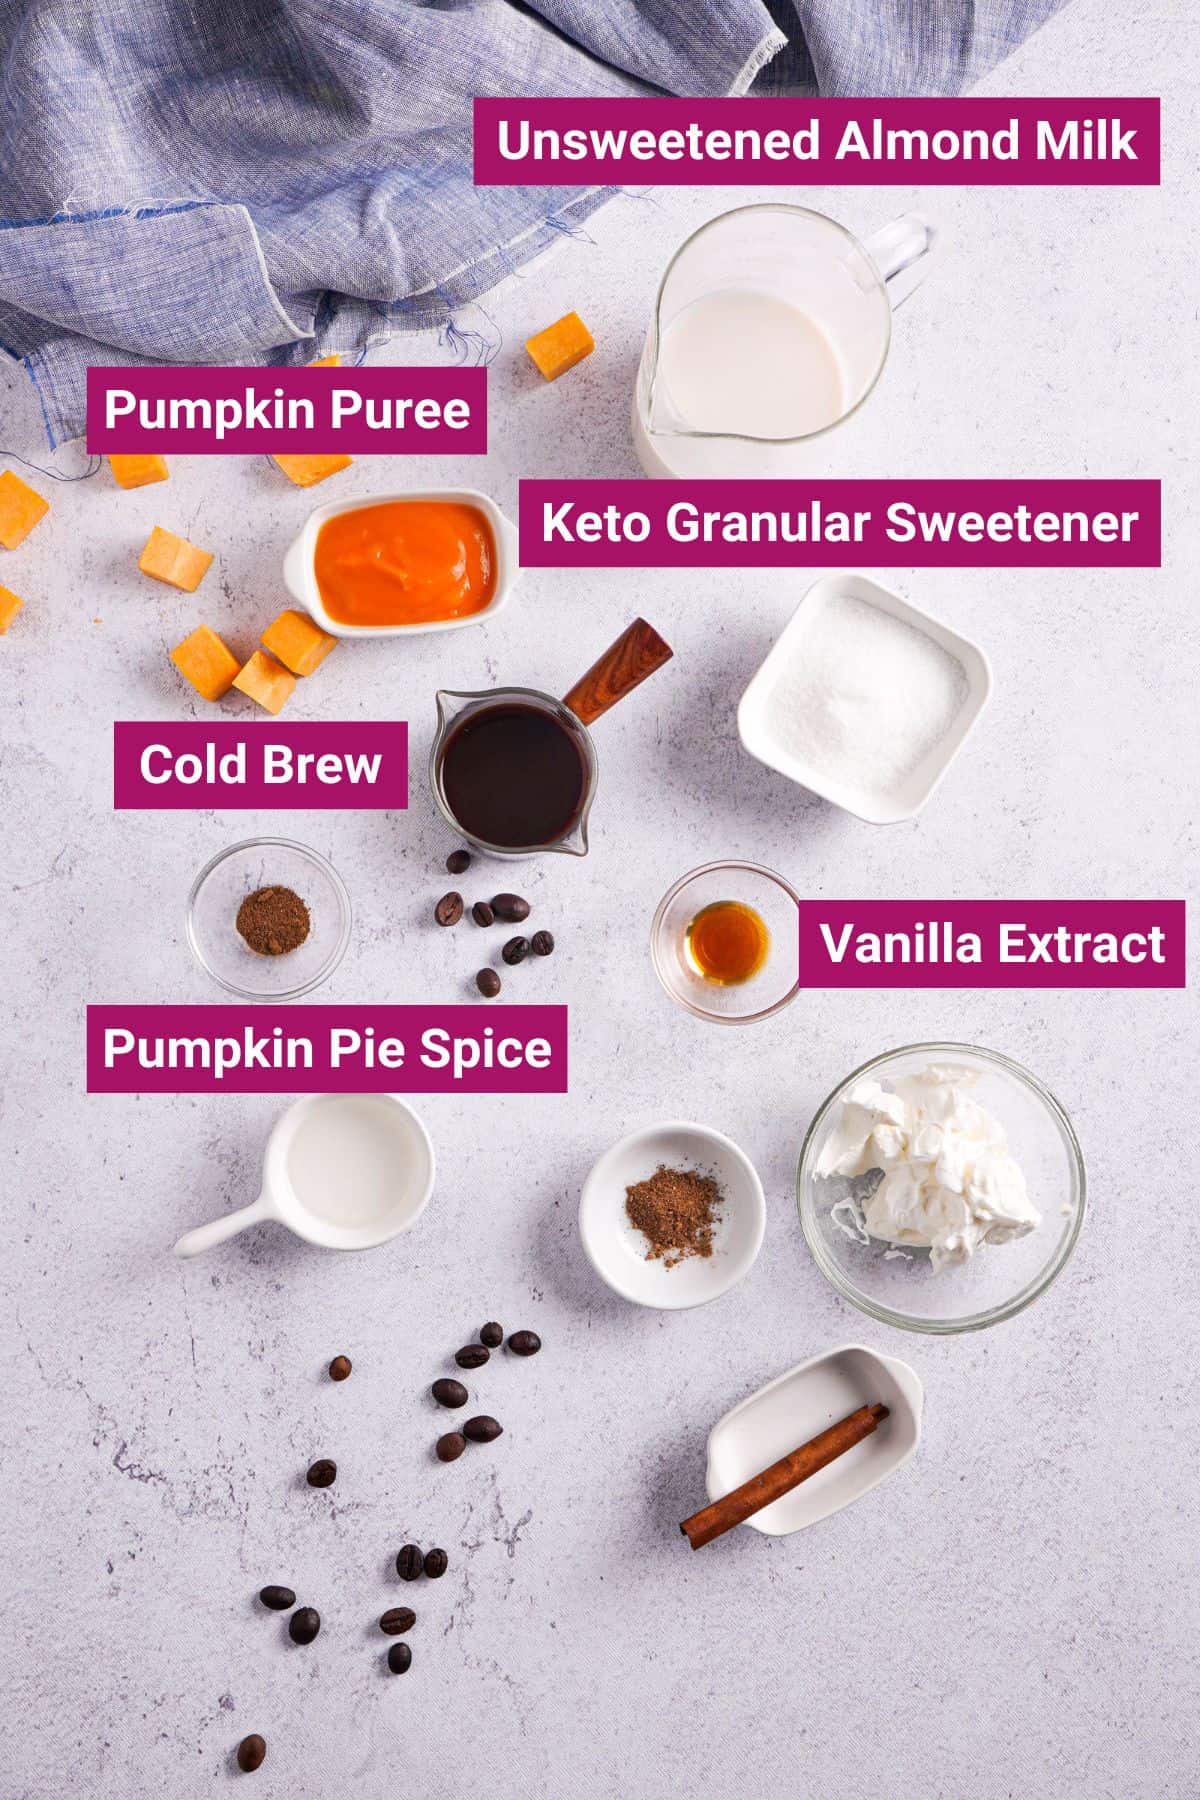 ingredients needed to make Starbucks copycat pumpkin spice latte cold brew: almond milk, pumpkin pie spice, vanilla extract, sweetener, pumpkin purée, cinnamon stick, and whipped cream on separate bowls and containers